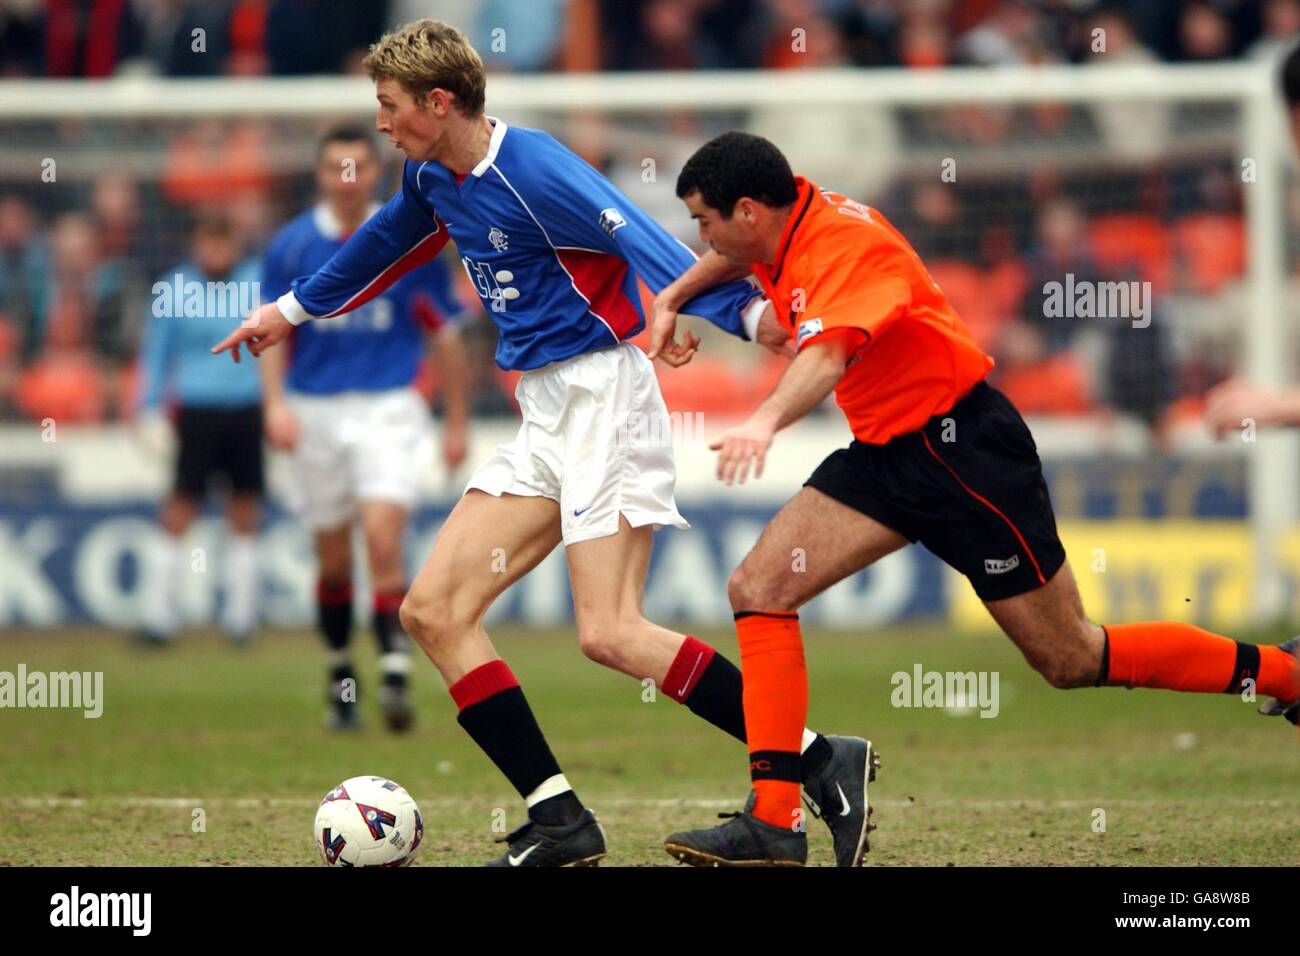 Soccer - Bank Of Scotland Premier Division - Dundee United v Rangers. Dundee United's David Hannah (r) puts Rangers' Tore Andre Flo (l) under pressure Stock Photo